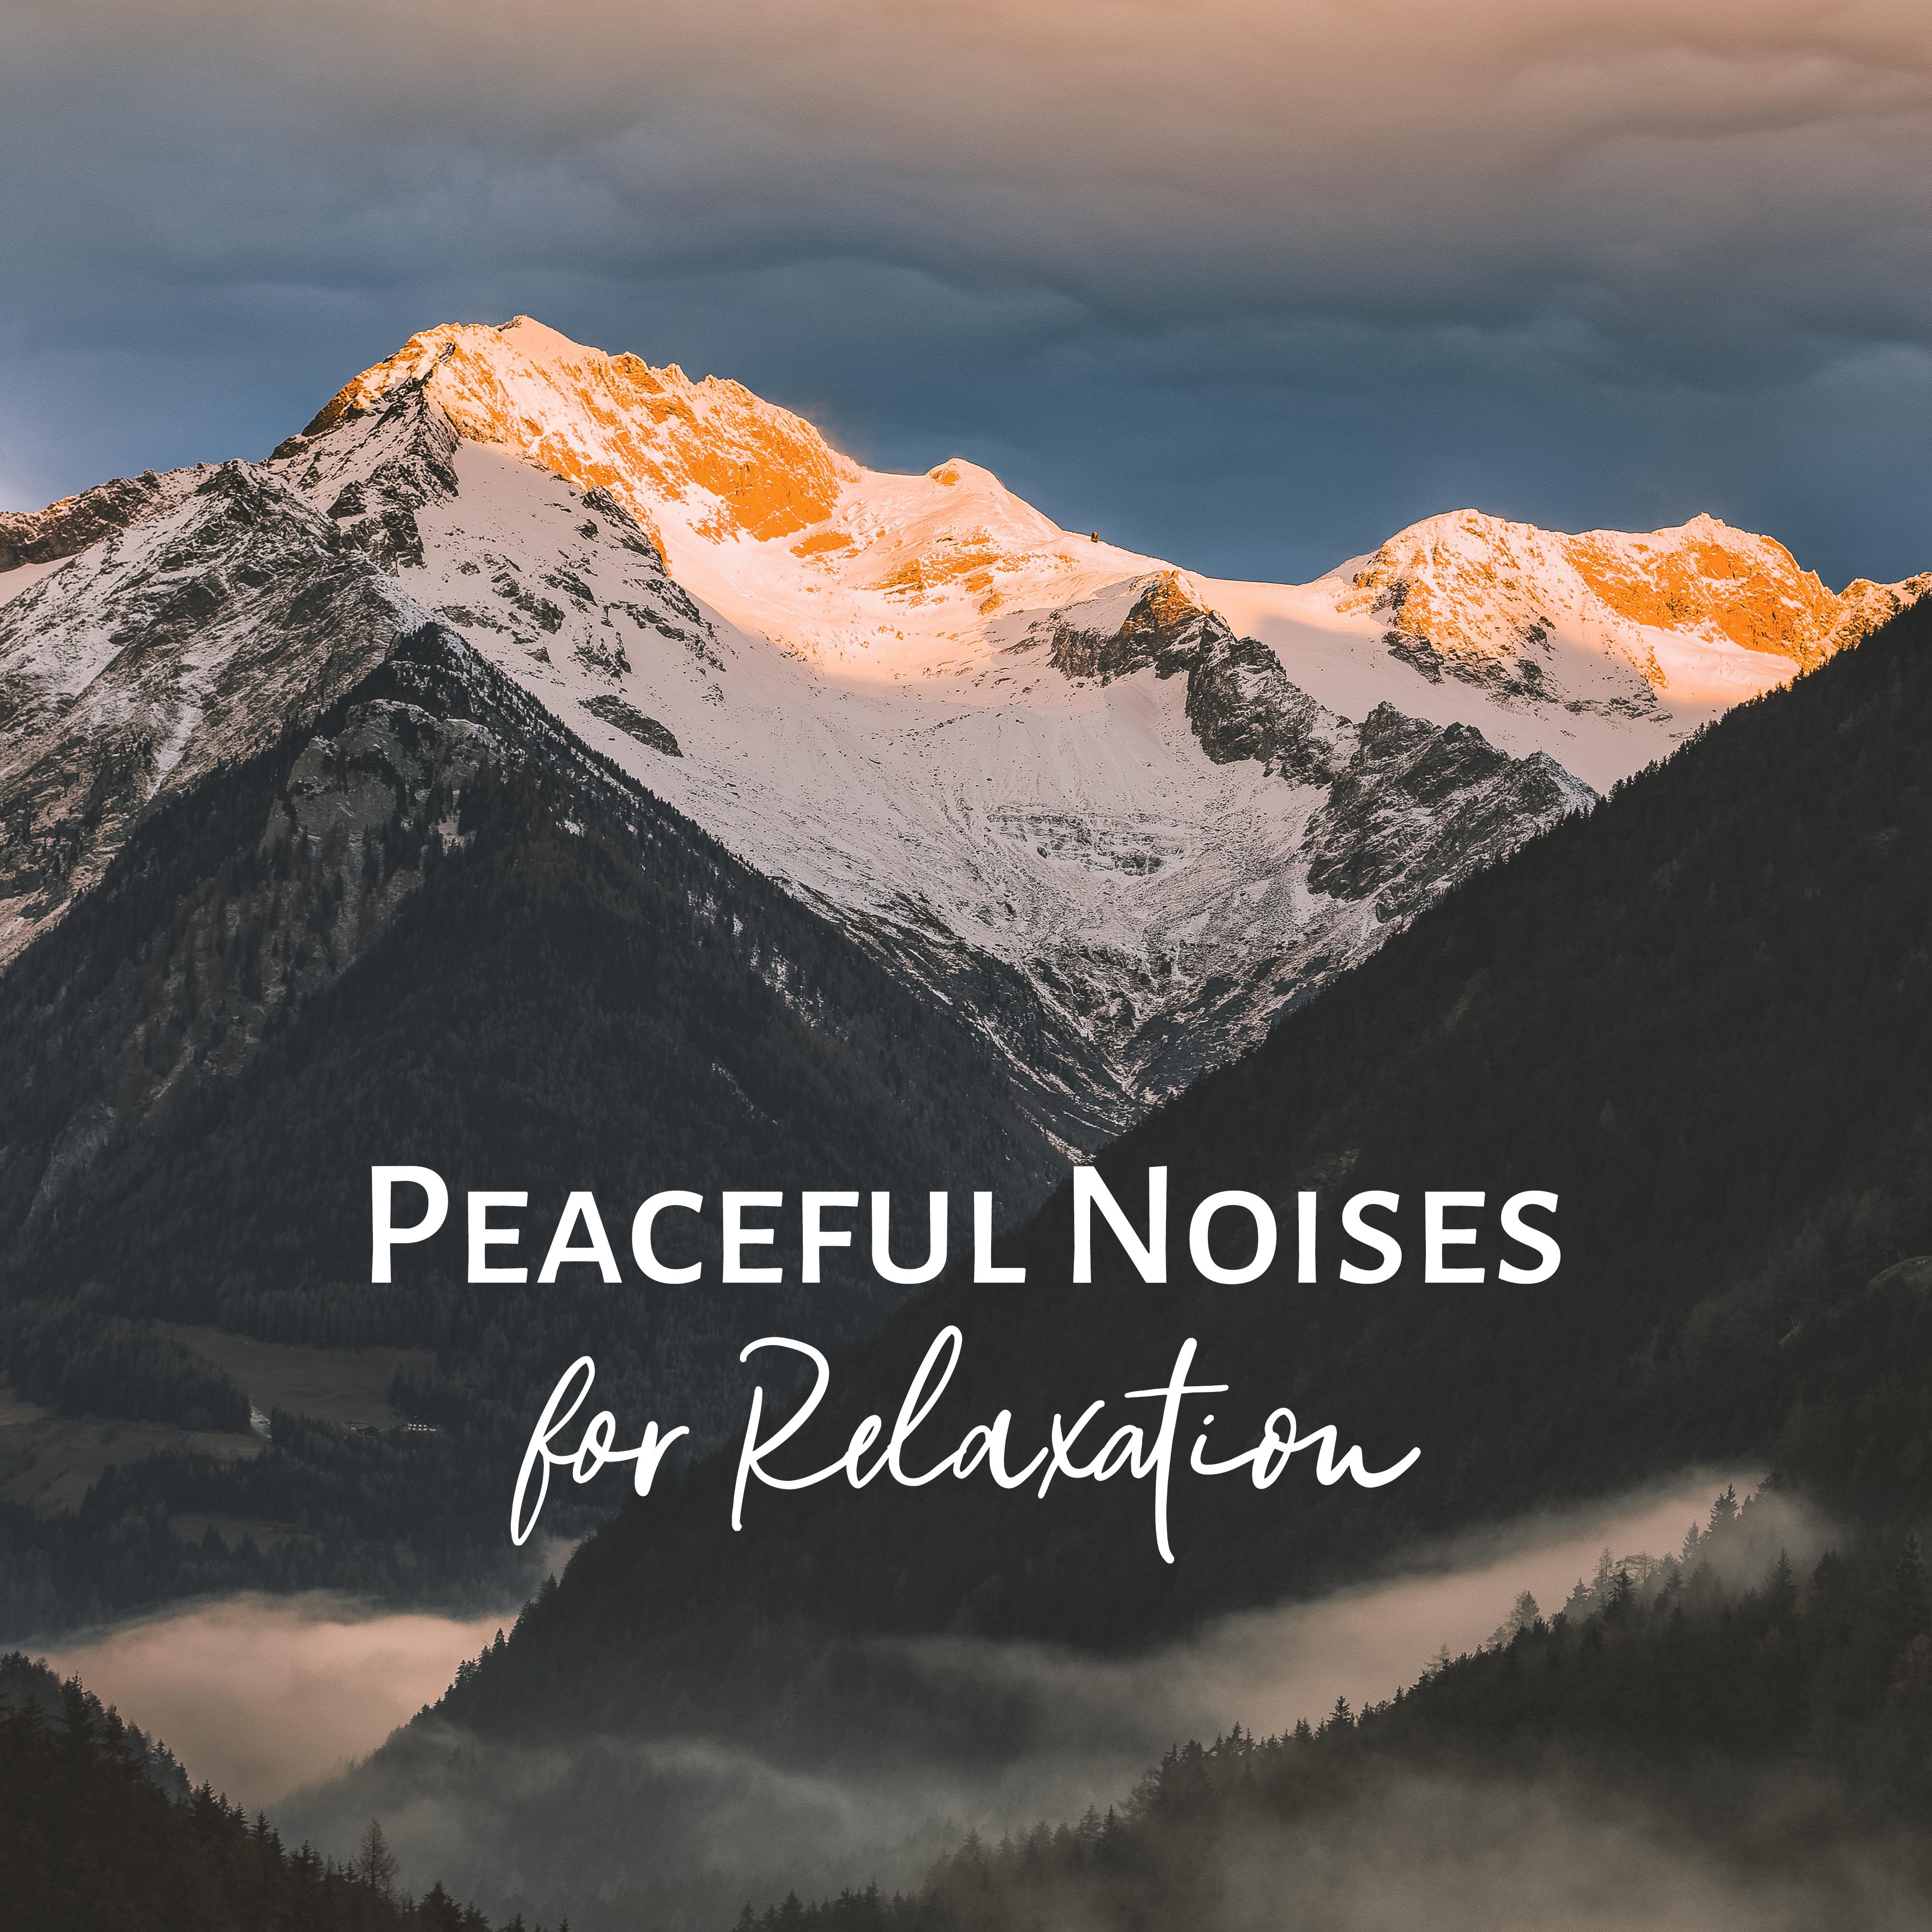 Peaceful Noises for Relaxation